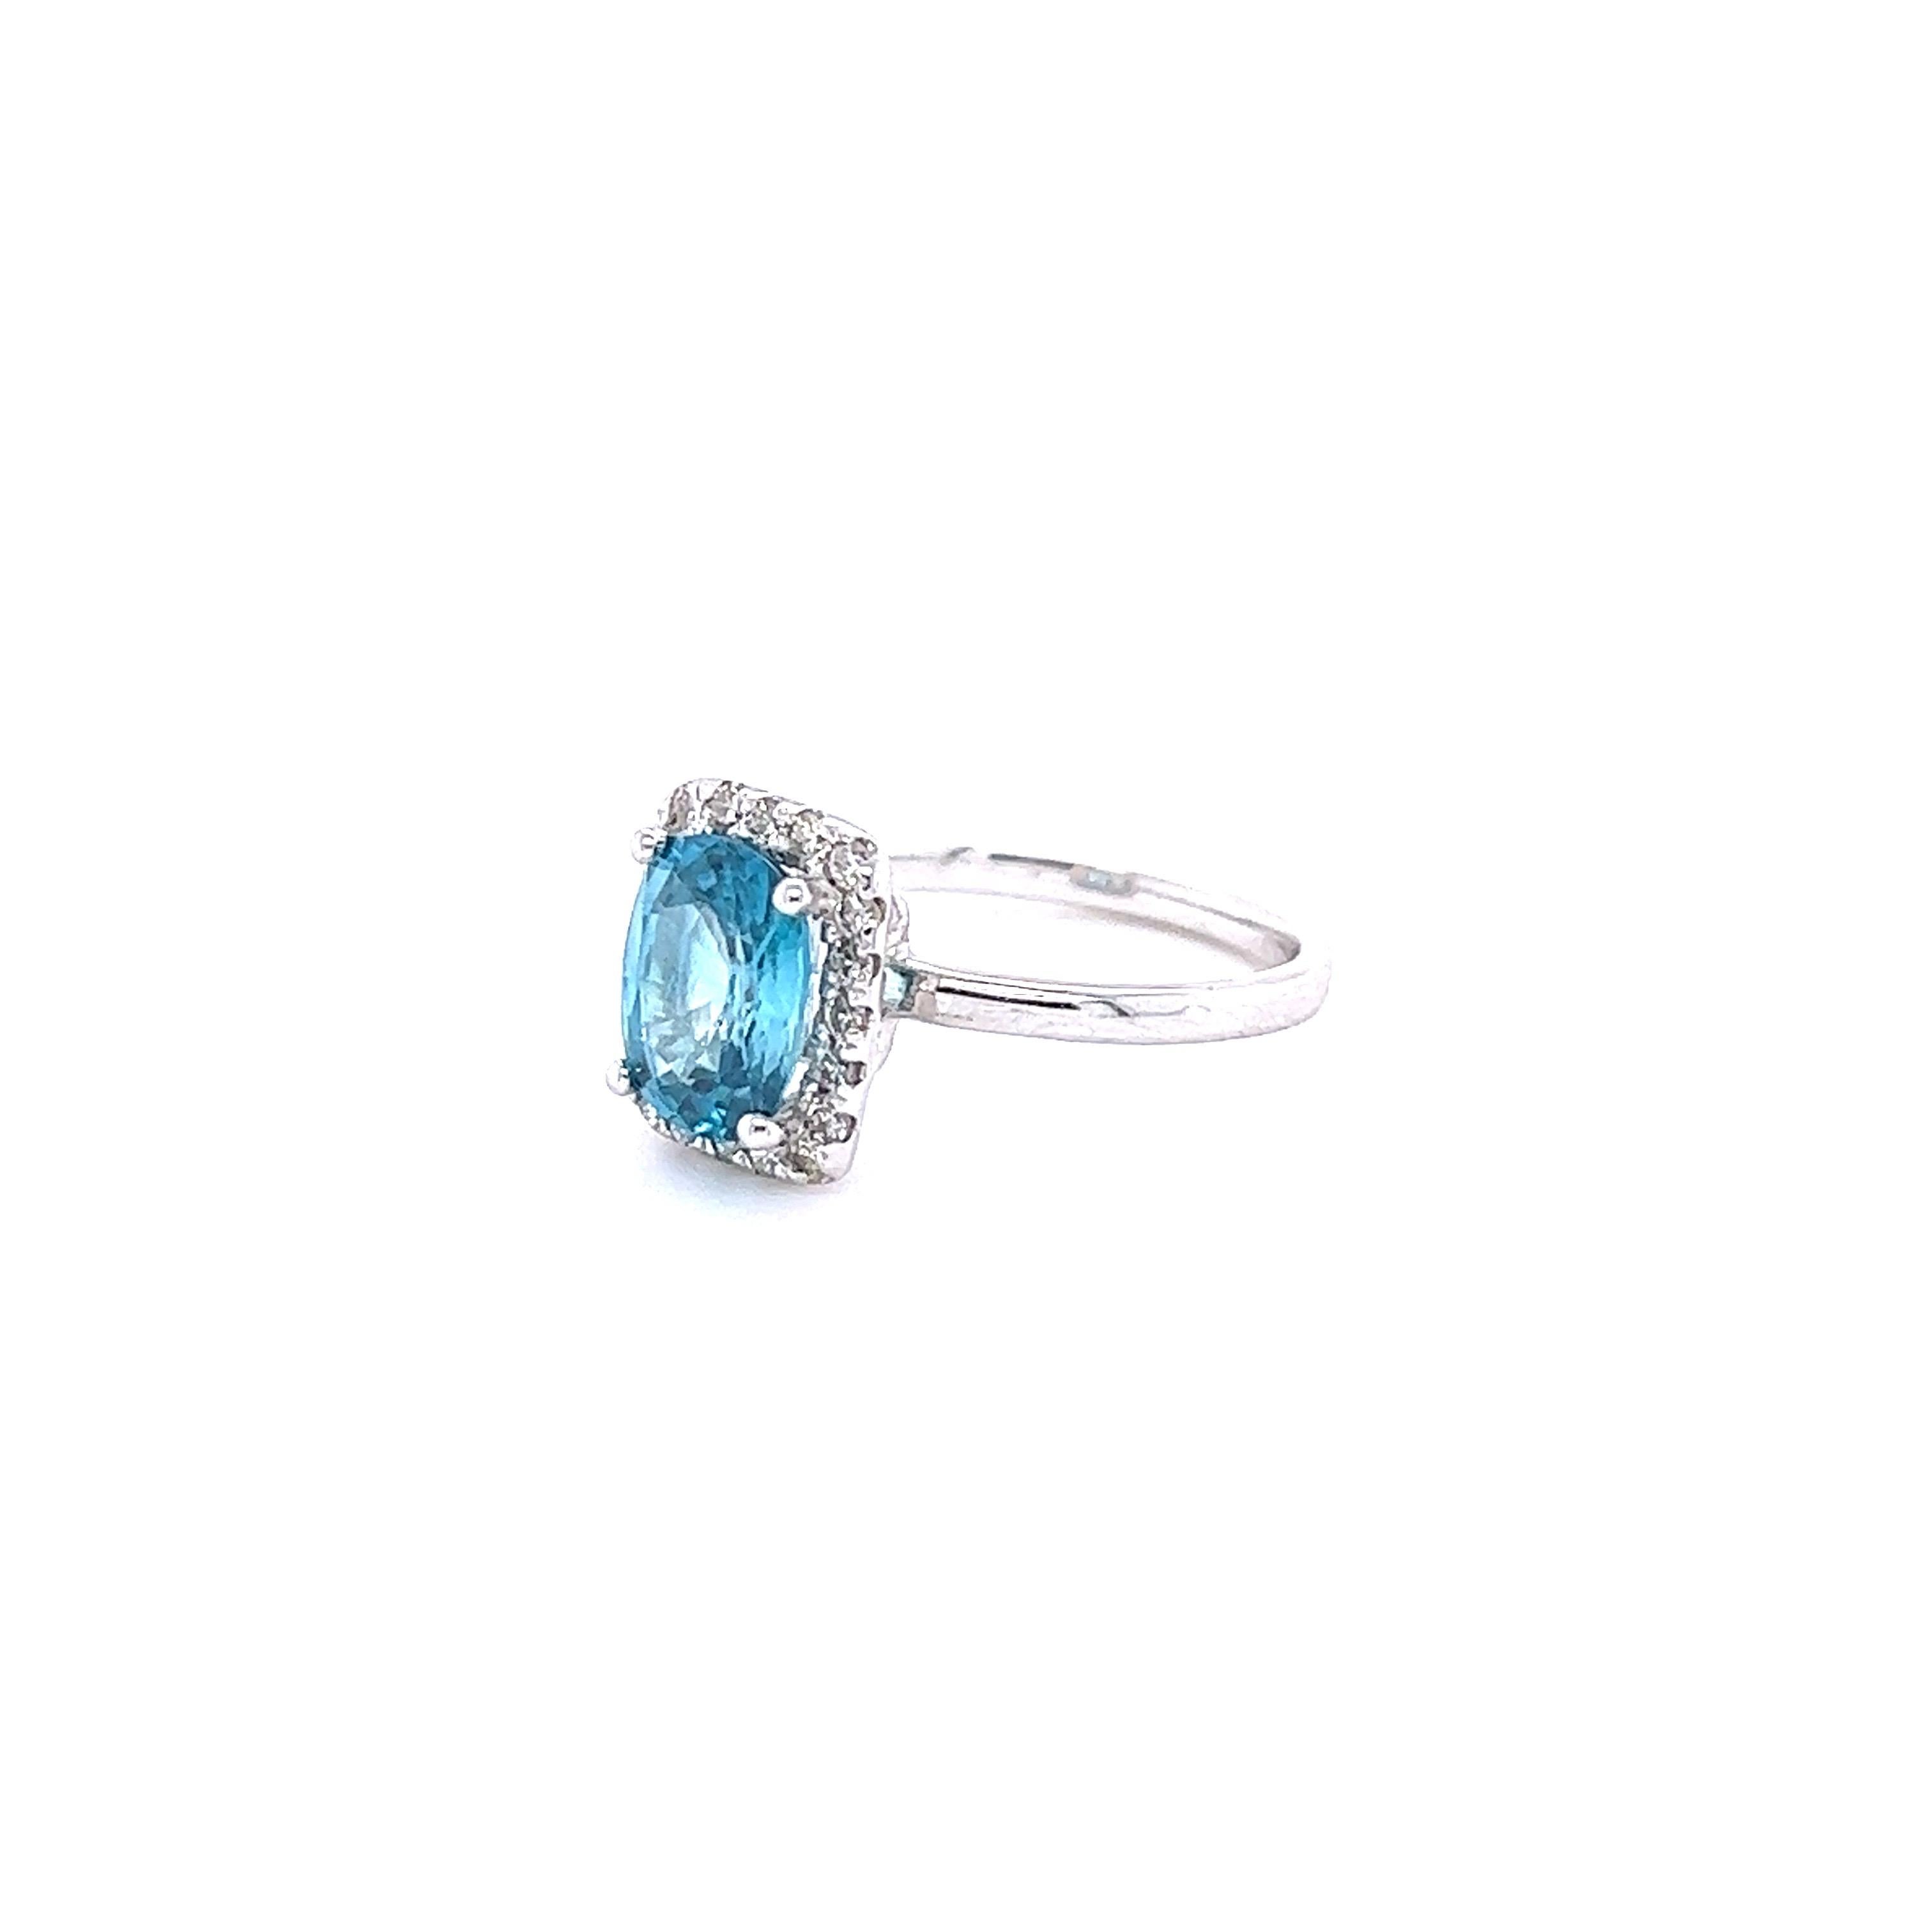 A beautiful Blue Zircon and Diamond ring that can be a nice Engagement ring or just an everyday ring!
Blue Zircon is a natural stone mined mainly in Sri Lanka, Myanmar, and Australia.  
This ring has a Oval Cut Blue Zircon that weighs 3.09 carats